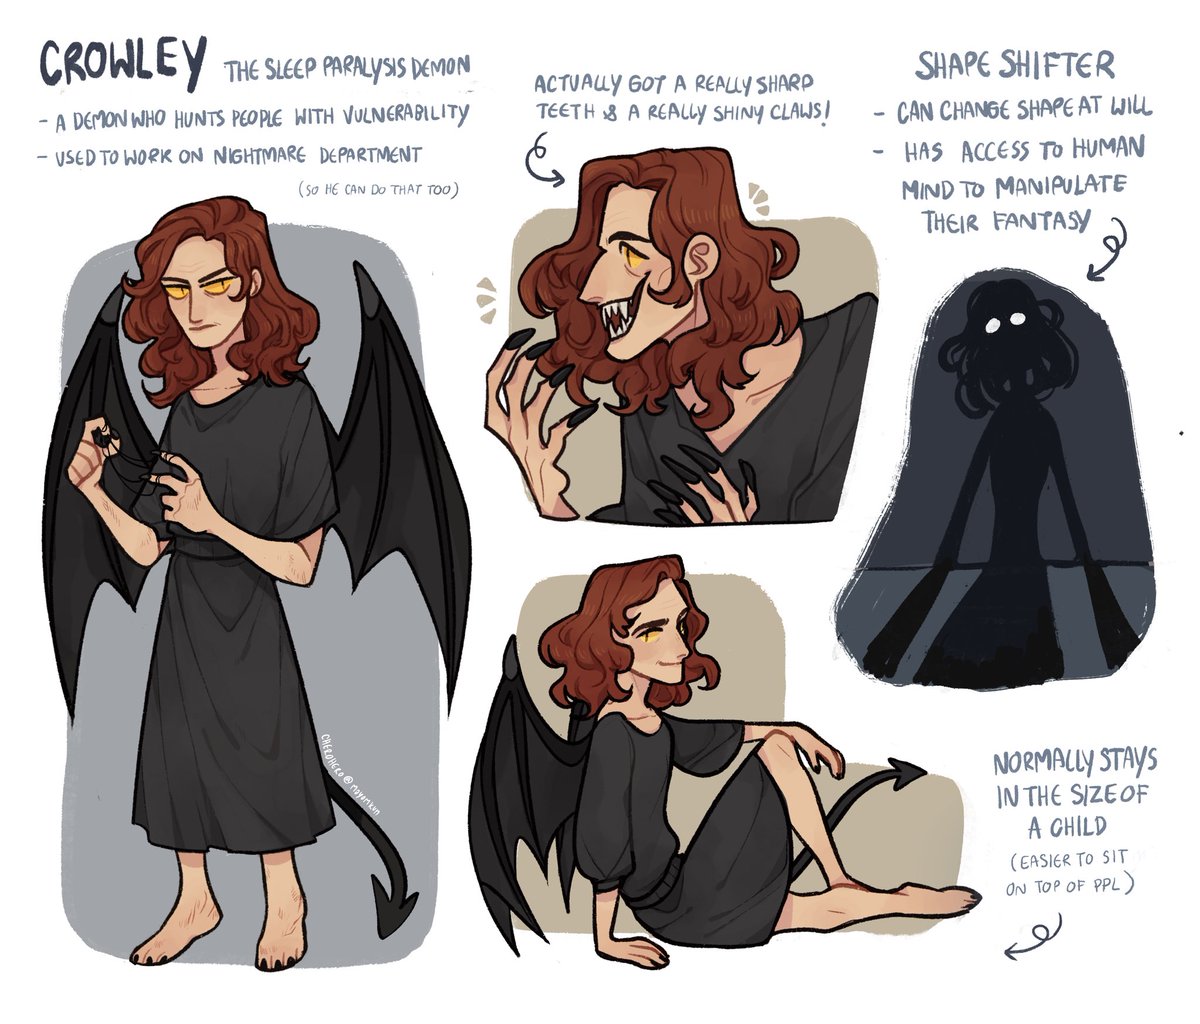 More about Sleep Paralysis Demon Crowley 